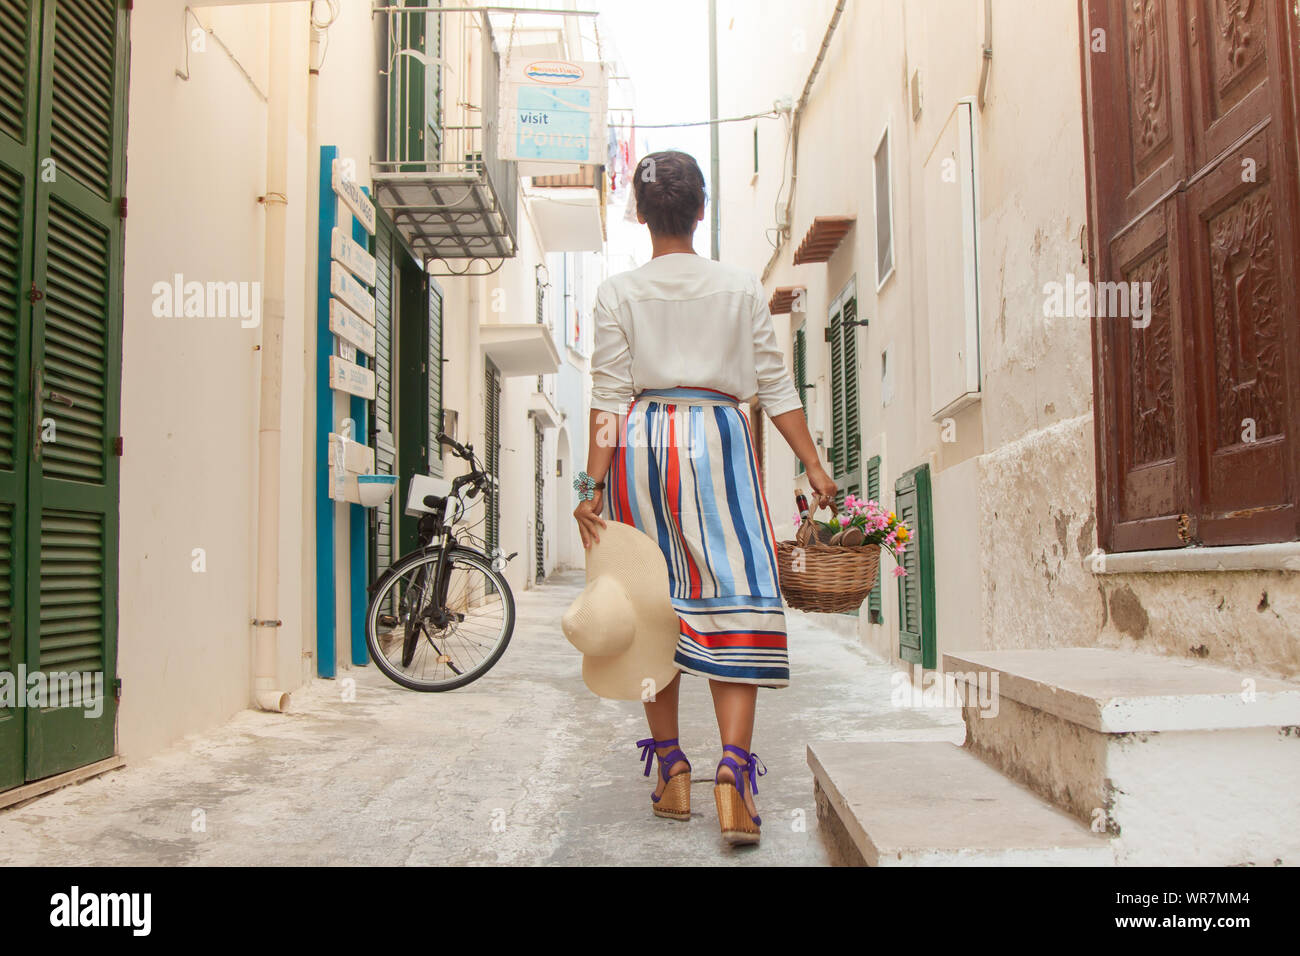 Young woman walking in a typical alley on Ponza island town, Italy. Fashion dress and sunglasses, white building. Stock Photo